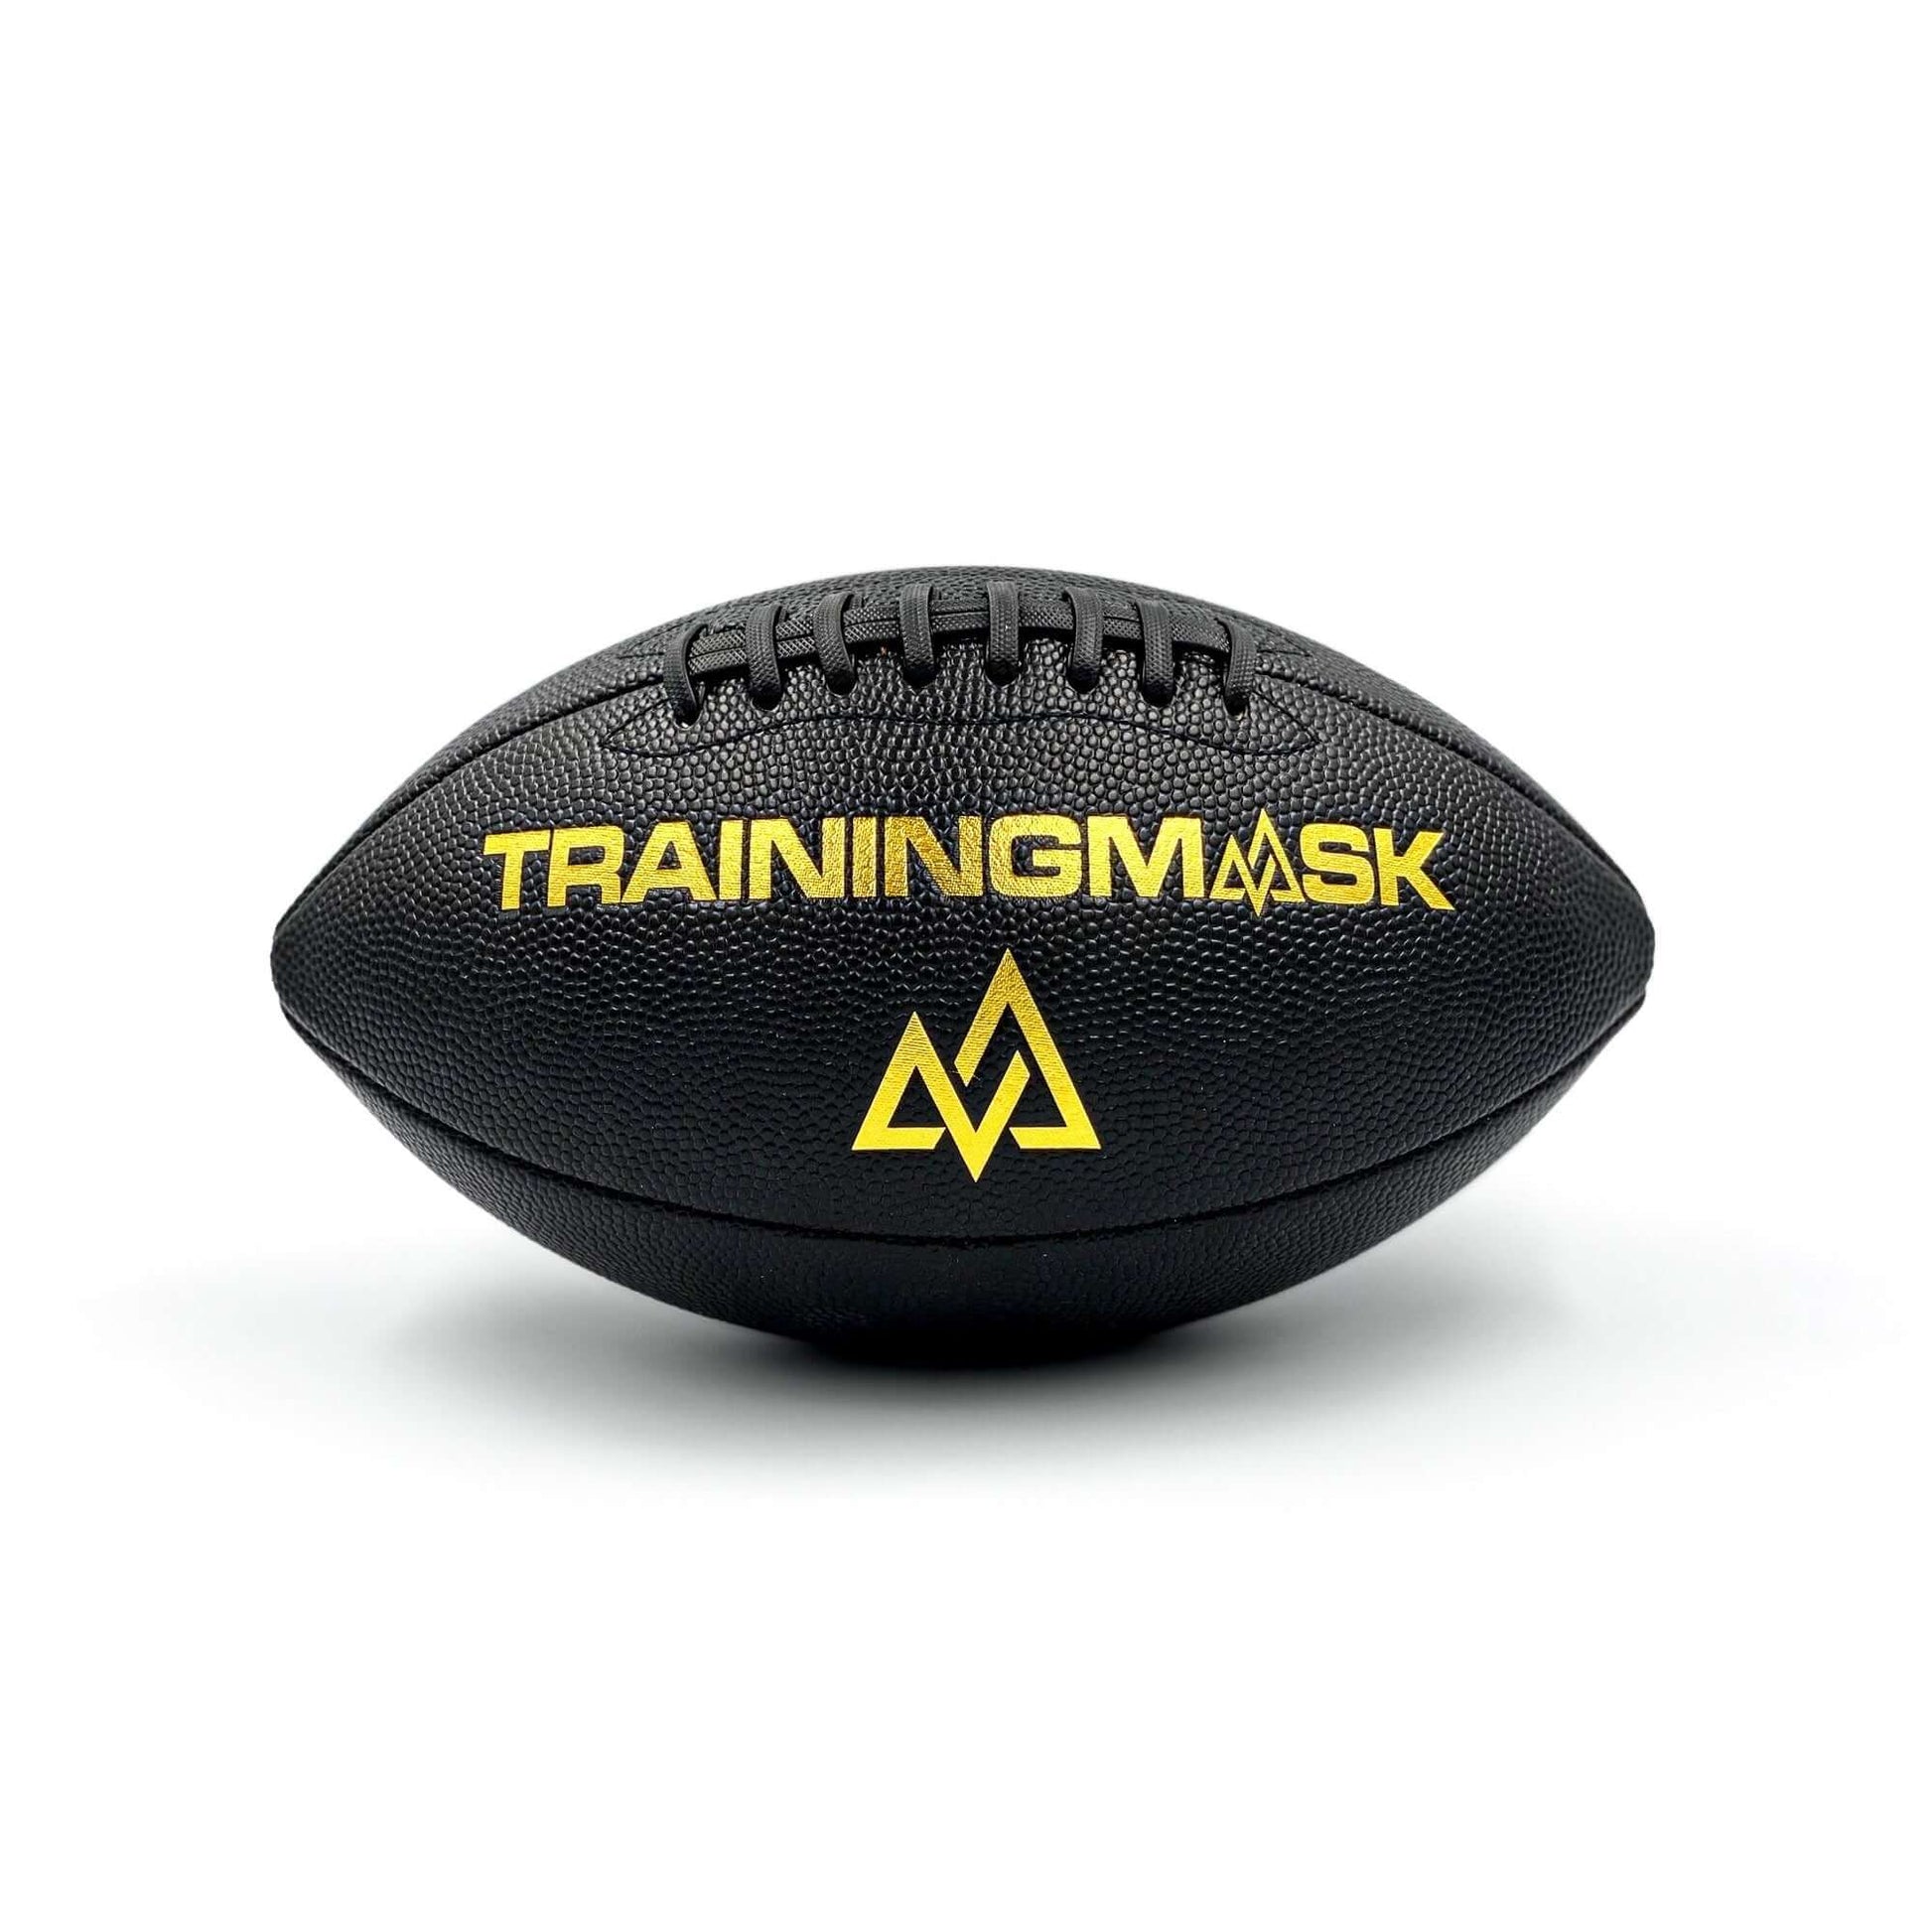 2.0 BlackOut Sports Bundle-Training Mask Football- Black and gold logo front view